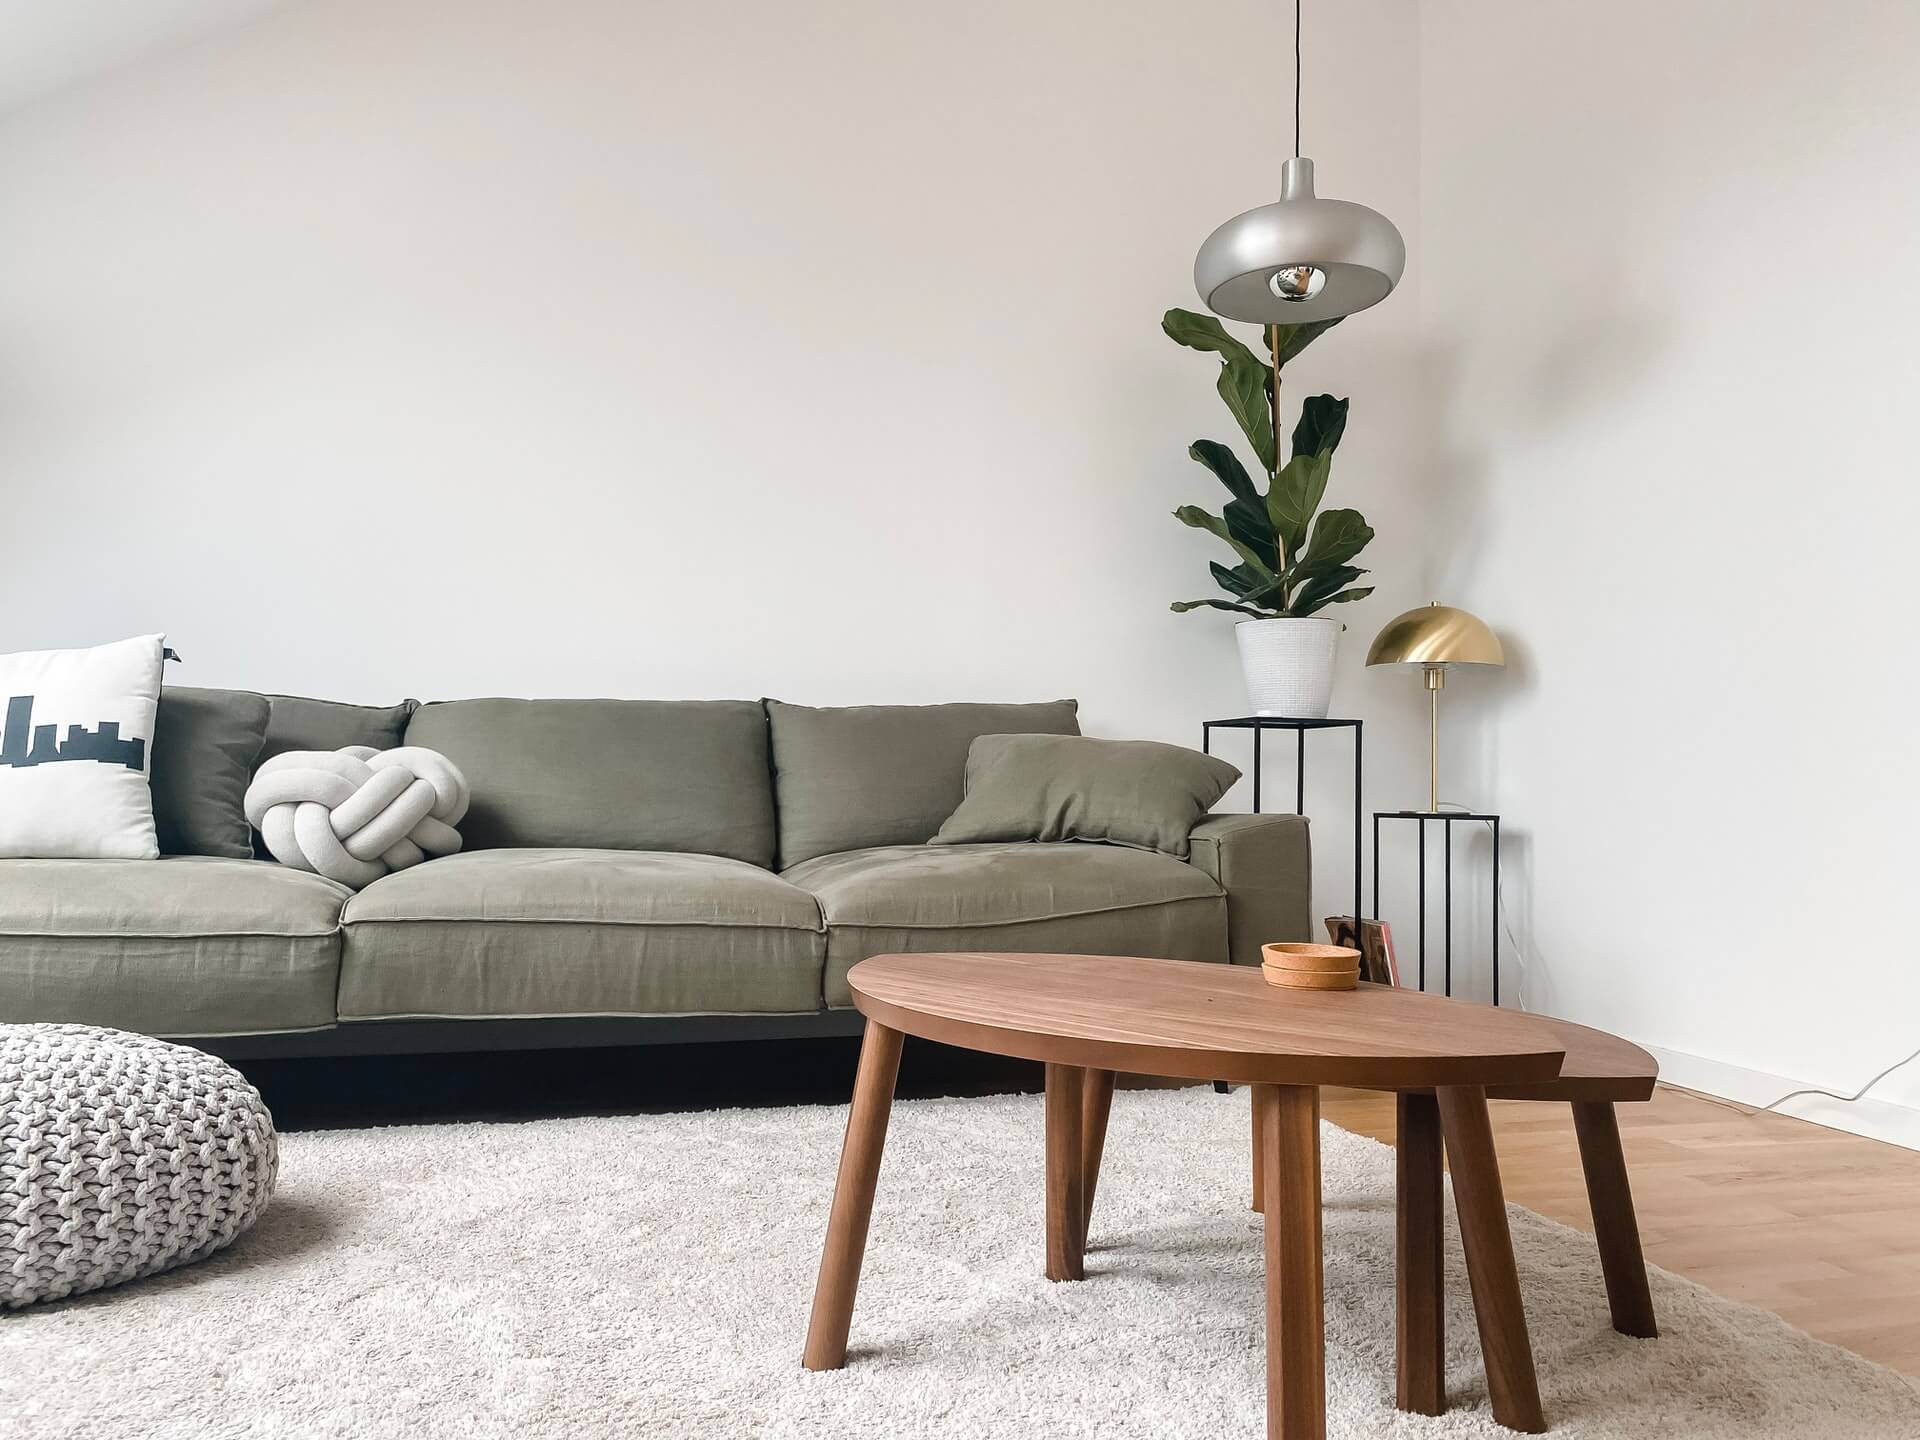 How to decorate a living room in Scandinavian style?